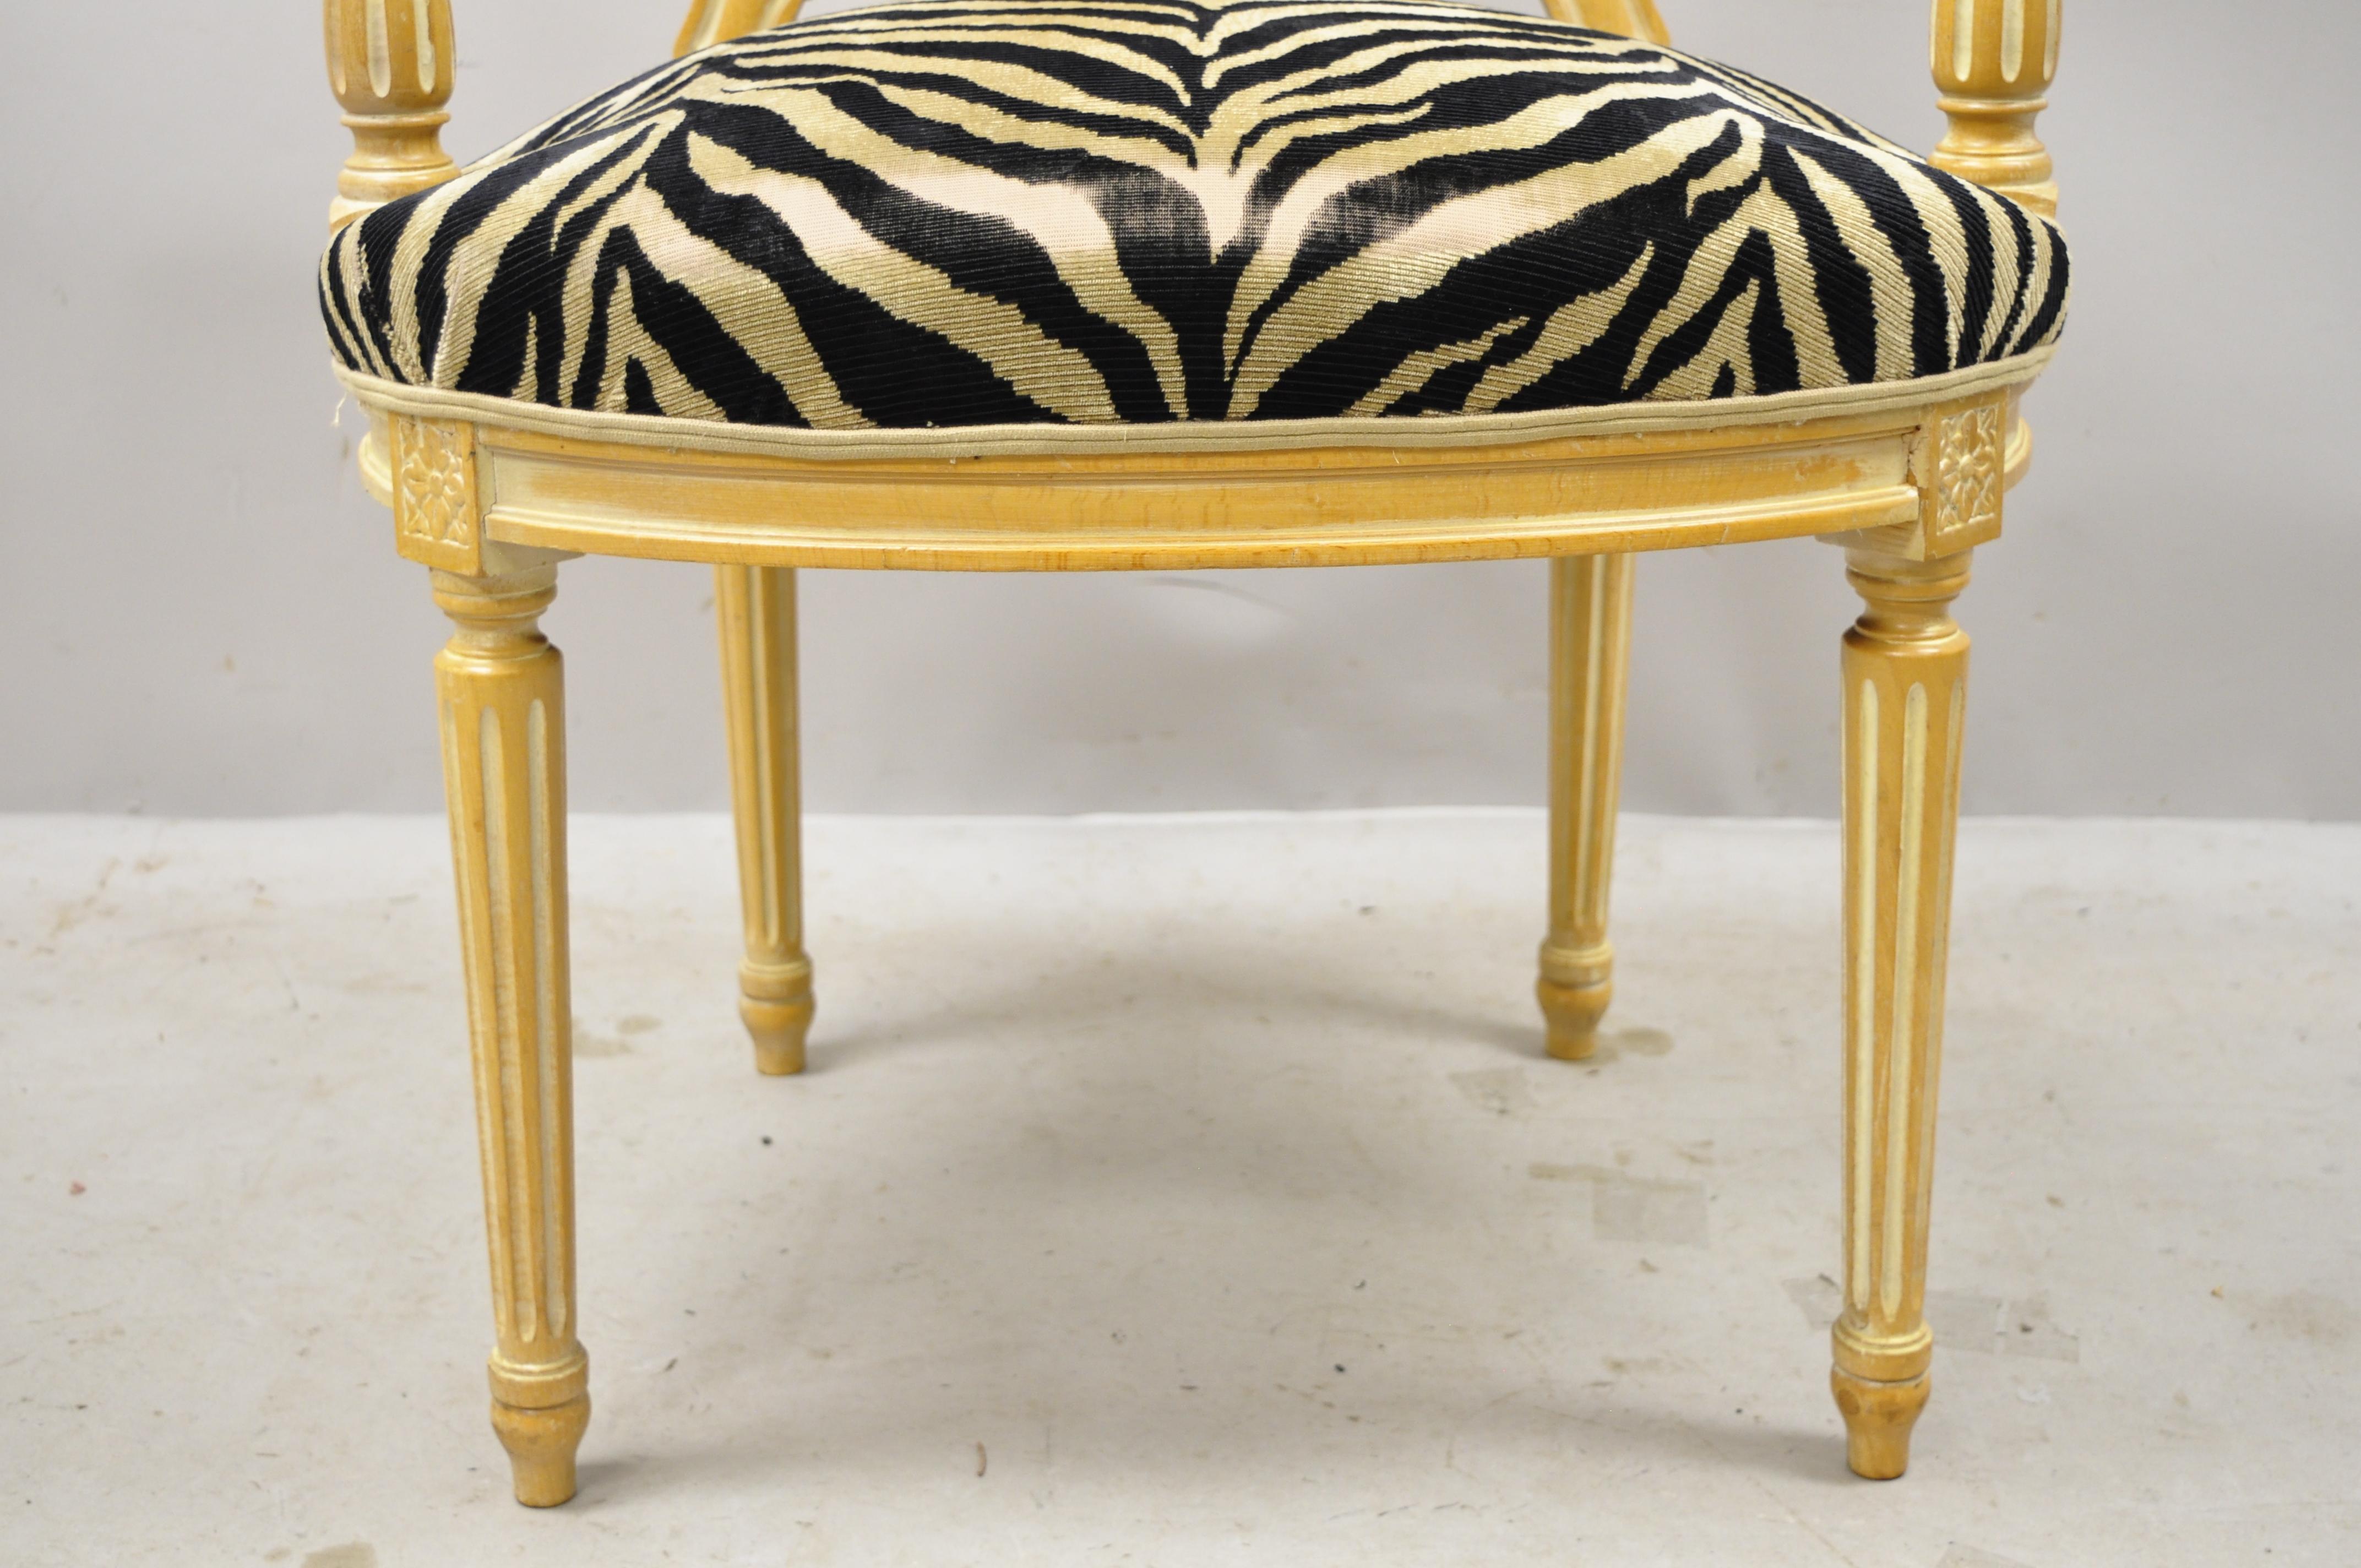 Neoclassical French Louis XVI Hot Air Balloon Back Montgolfier Zebra Print Fauteuil Armchair For Sale